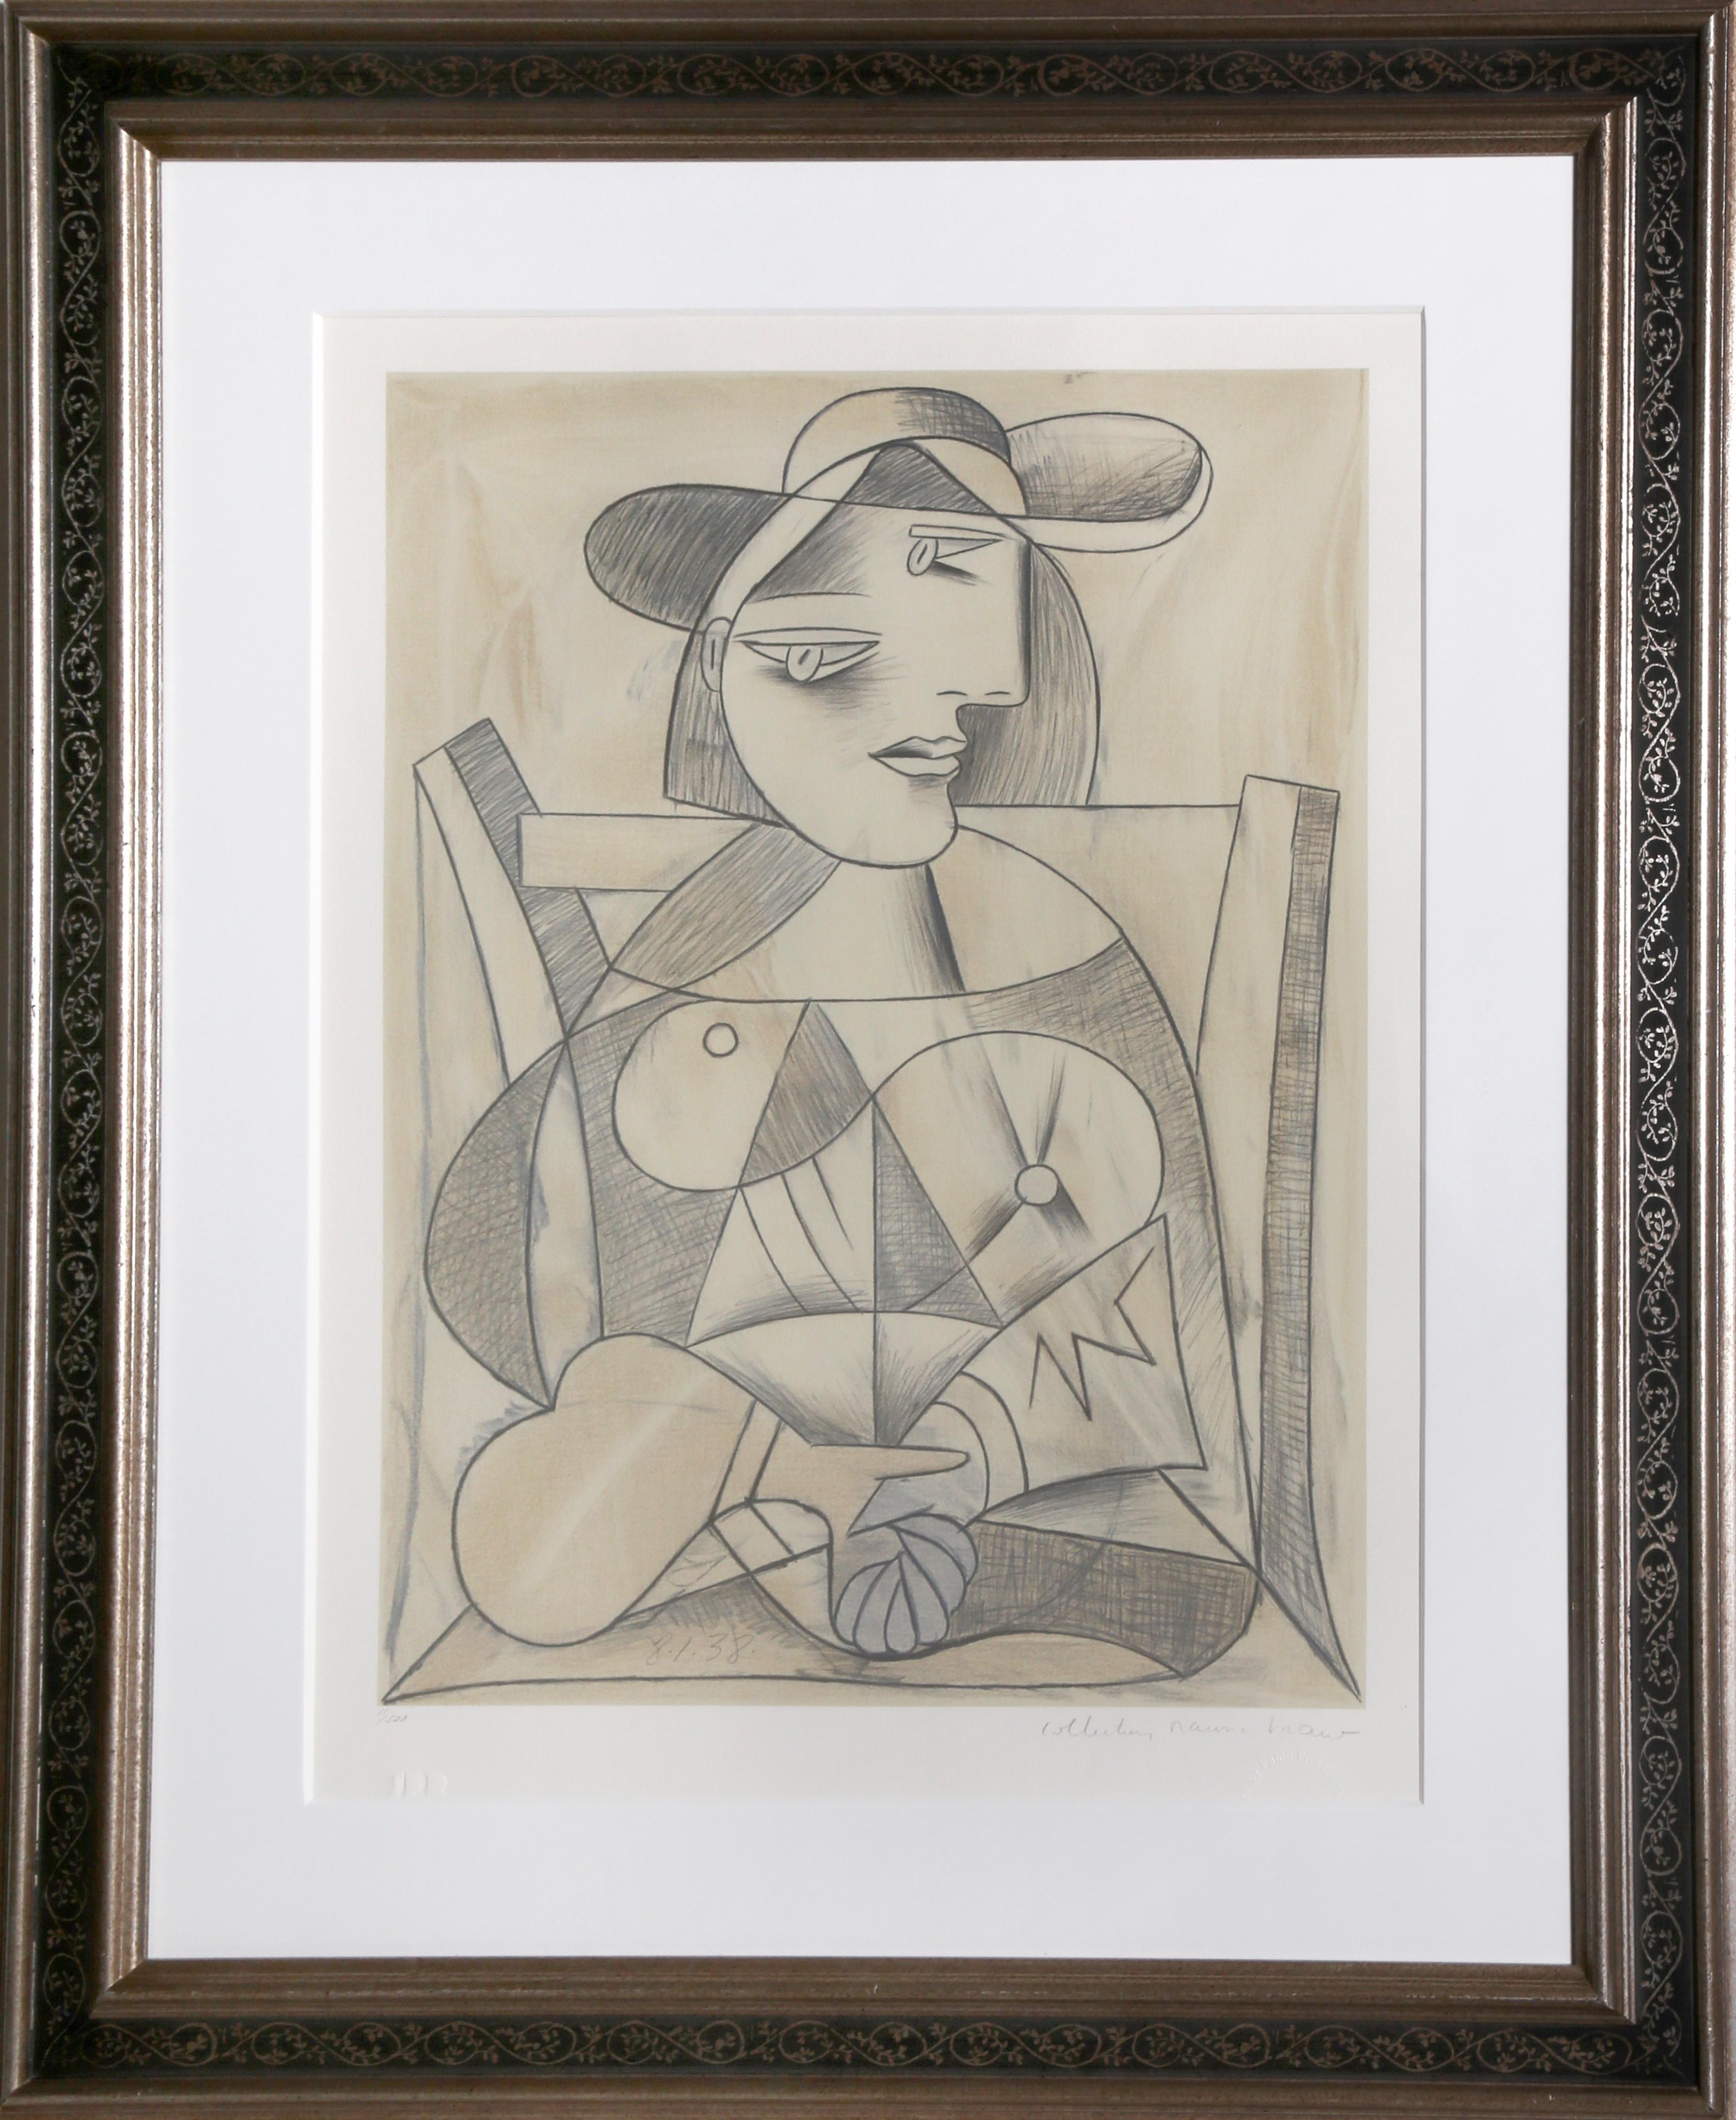 A lithograph from the Marina Picasso Estate Collection after the Pablo Picasso painting "Femme aux Mains Jointes (Marie-Therese Walter)
".  The original painting was completed in 1938. In the 1970's after Picasso's death, Marina Picasso, his